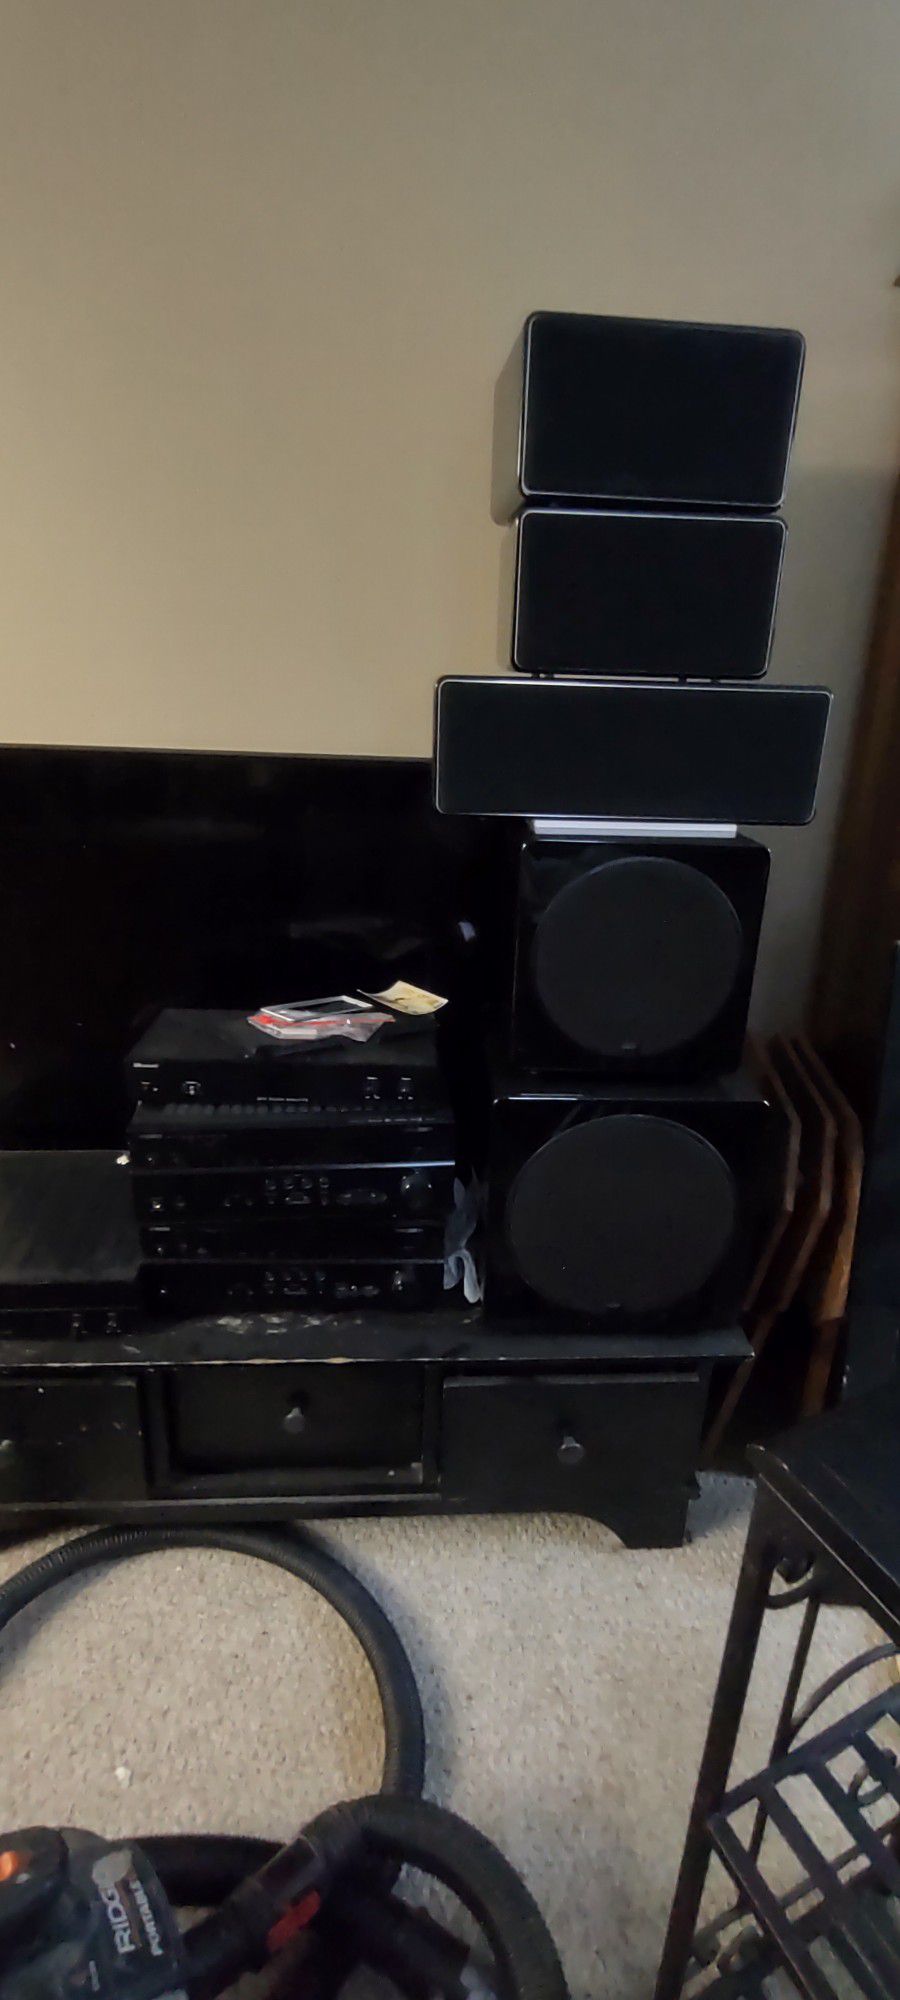 Trade High End Episode Speakers For Lawn Tractor Worth At Least $500 Or More